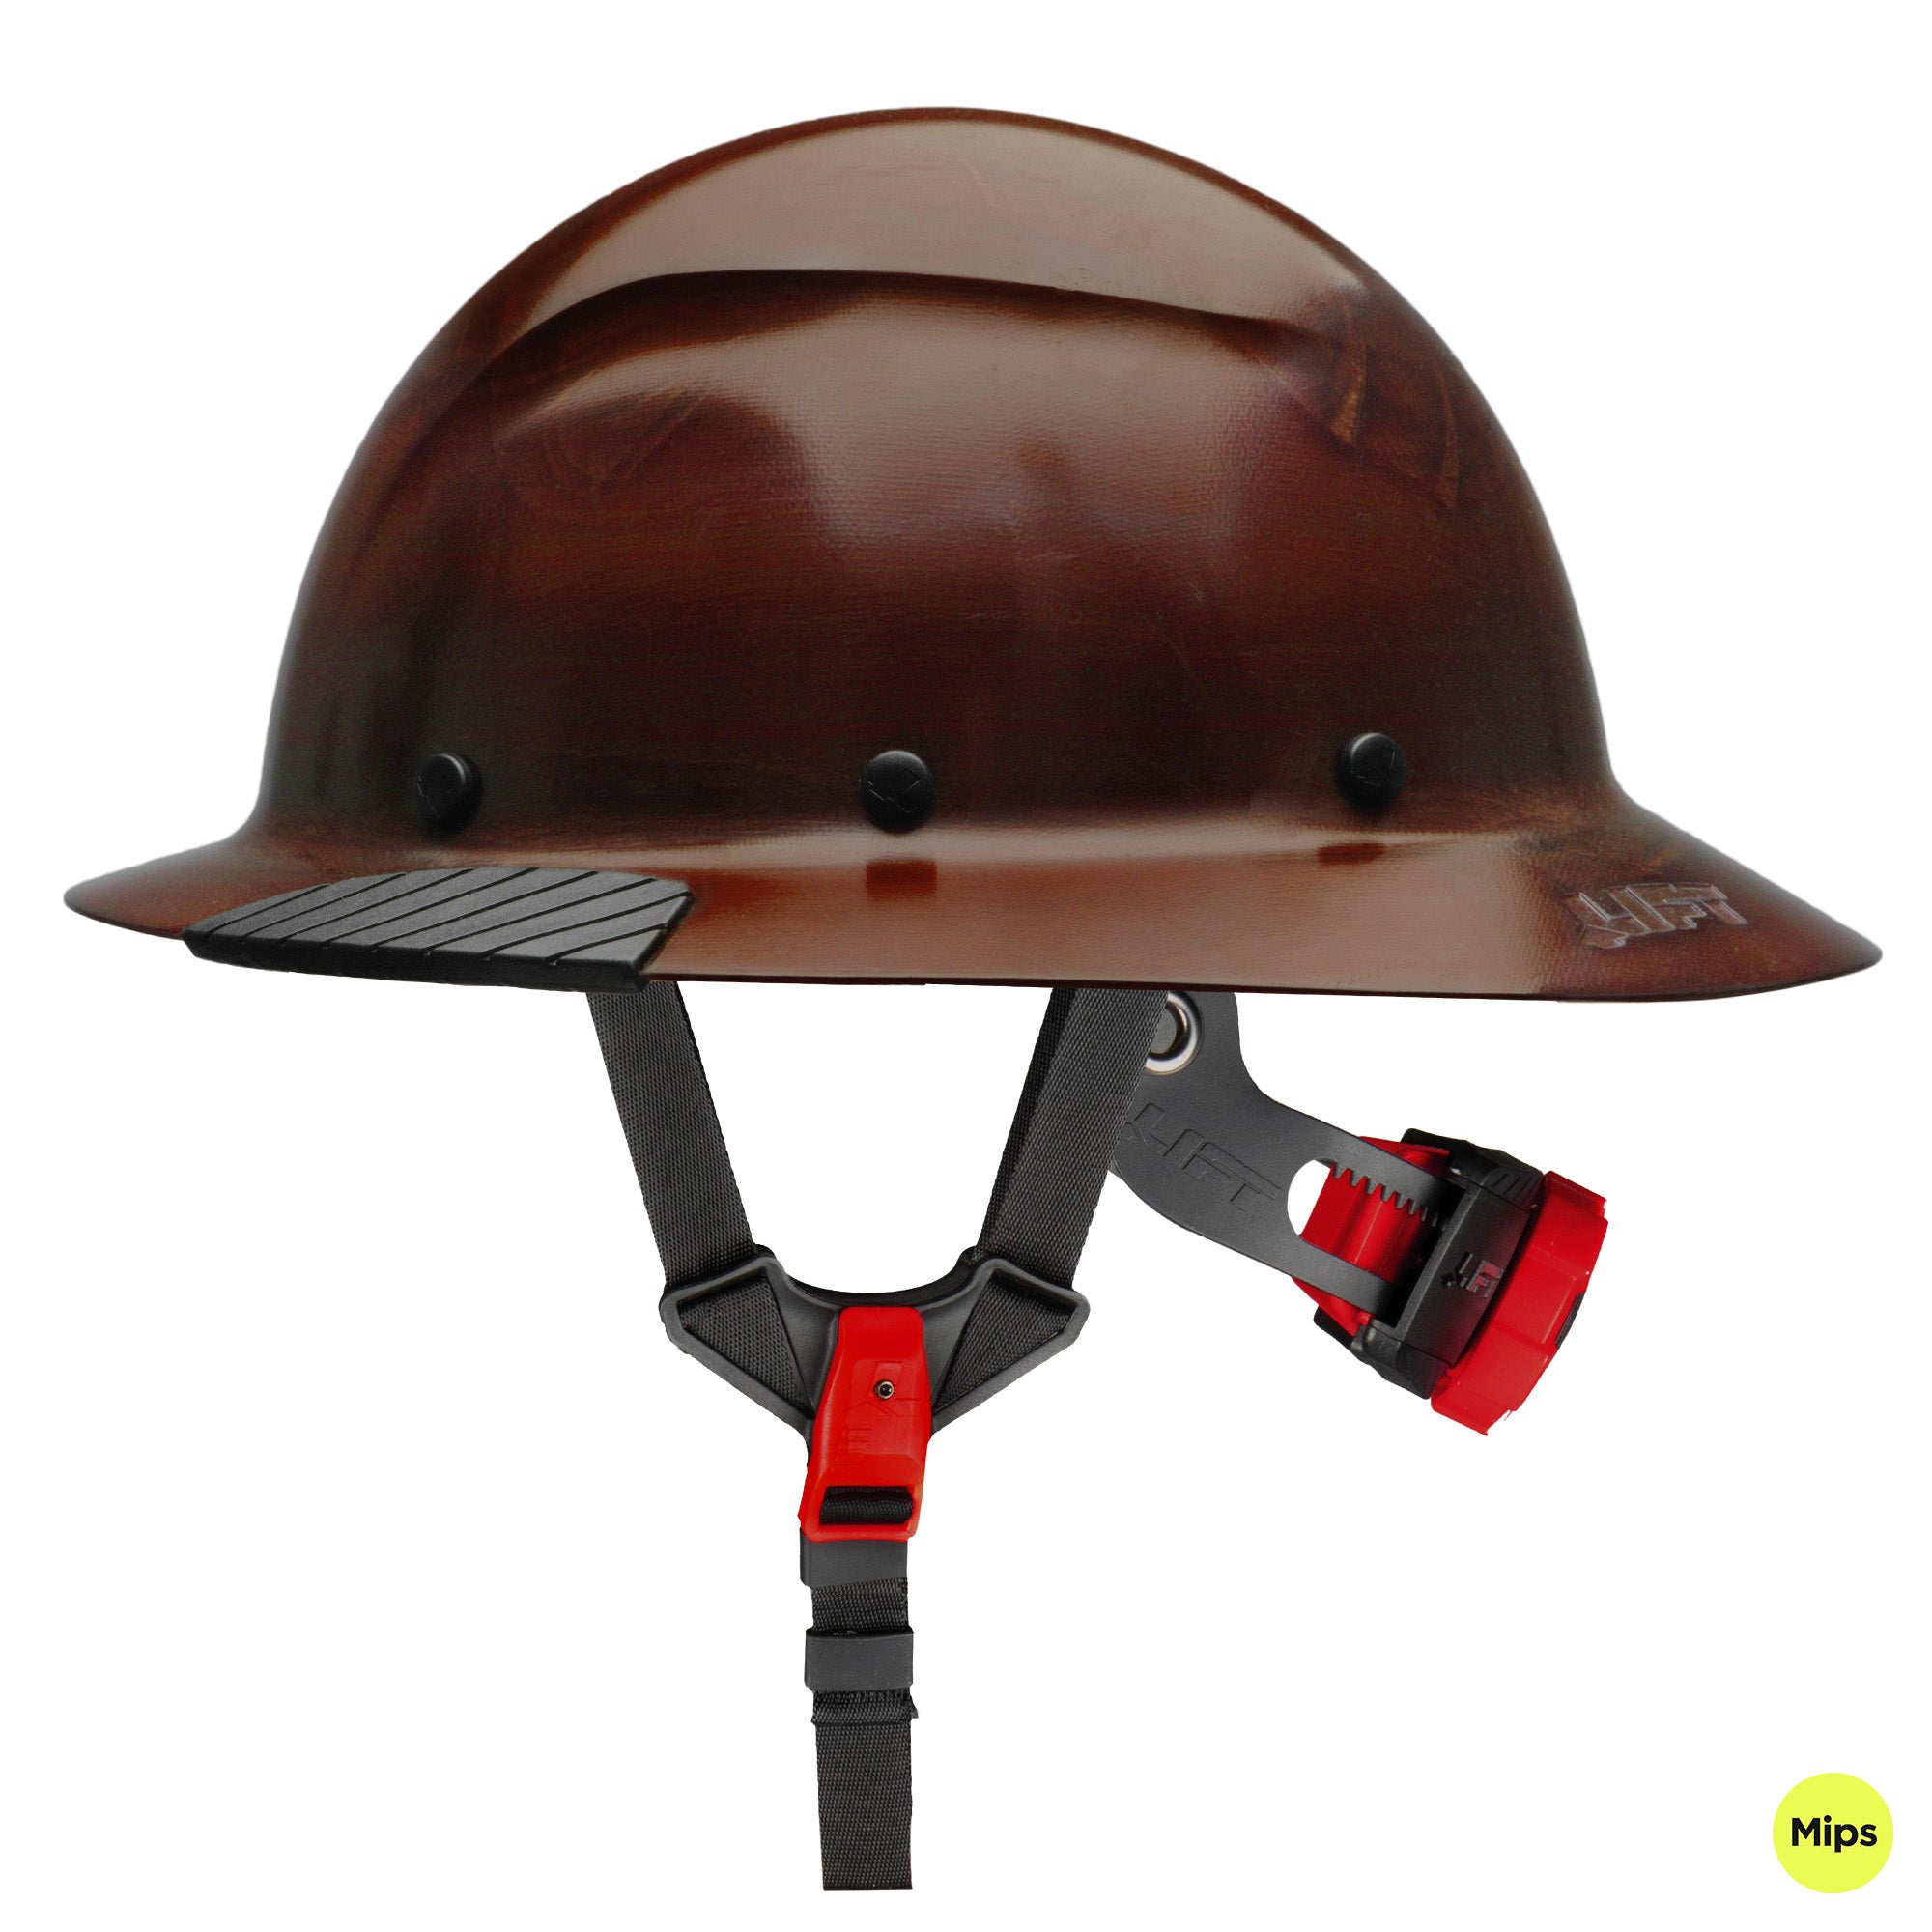 DAX Full Brim Hard Hat with Mips - Natural - LIFT Safety